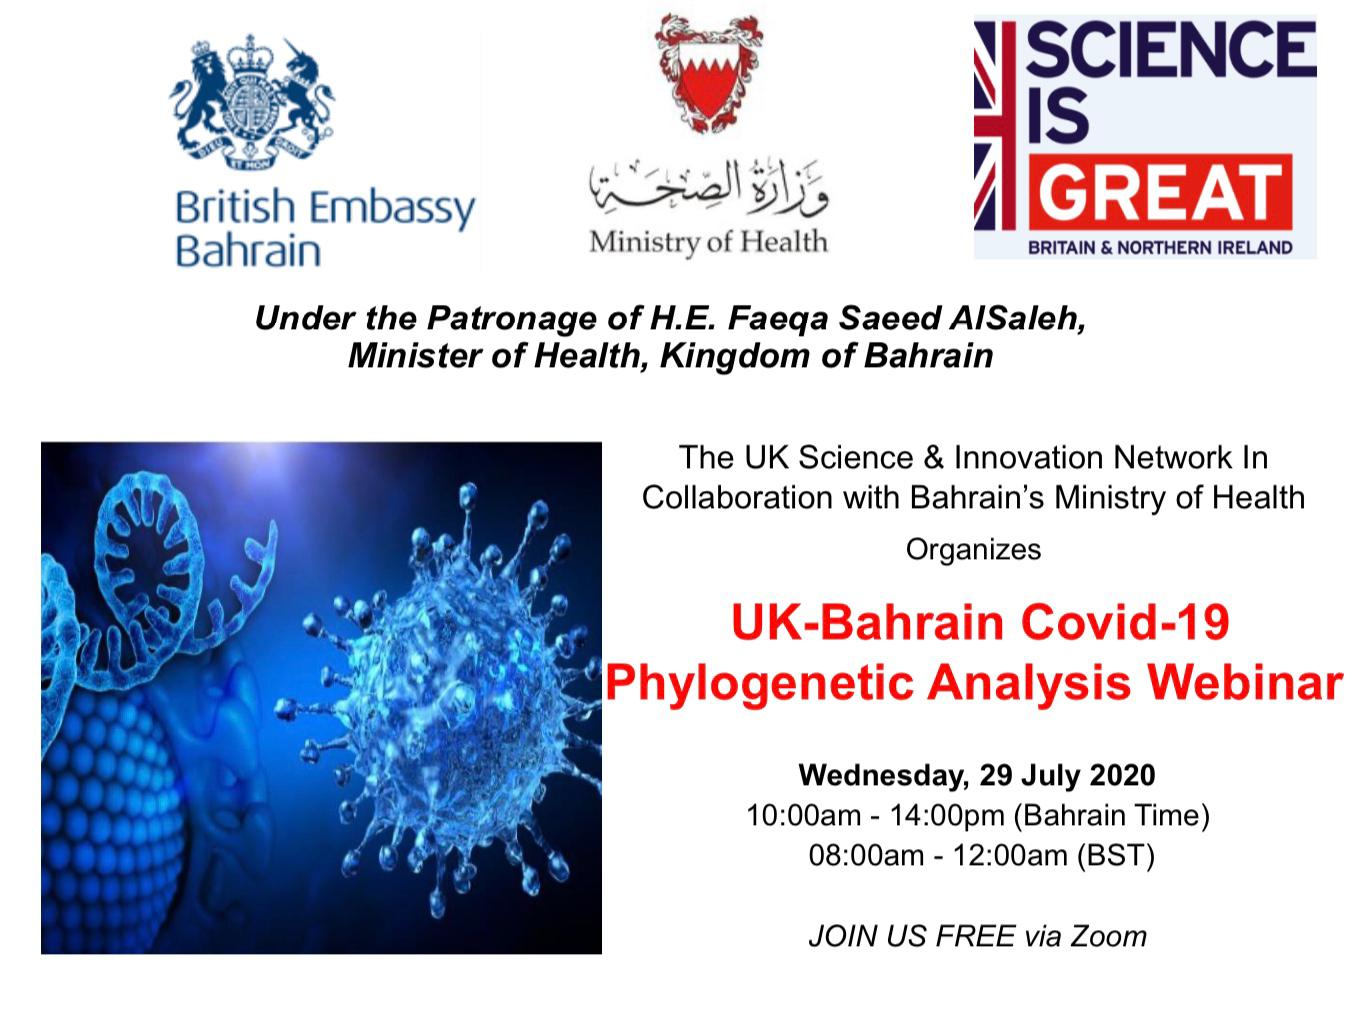 Under the Patronage of H.E. Faeqa Saeed AlSaleh, Minister of Health, the UK Science & Innovation Network In Collaboration with Bahrain’s Ministry of Health